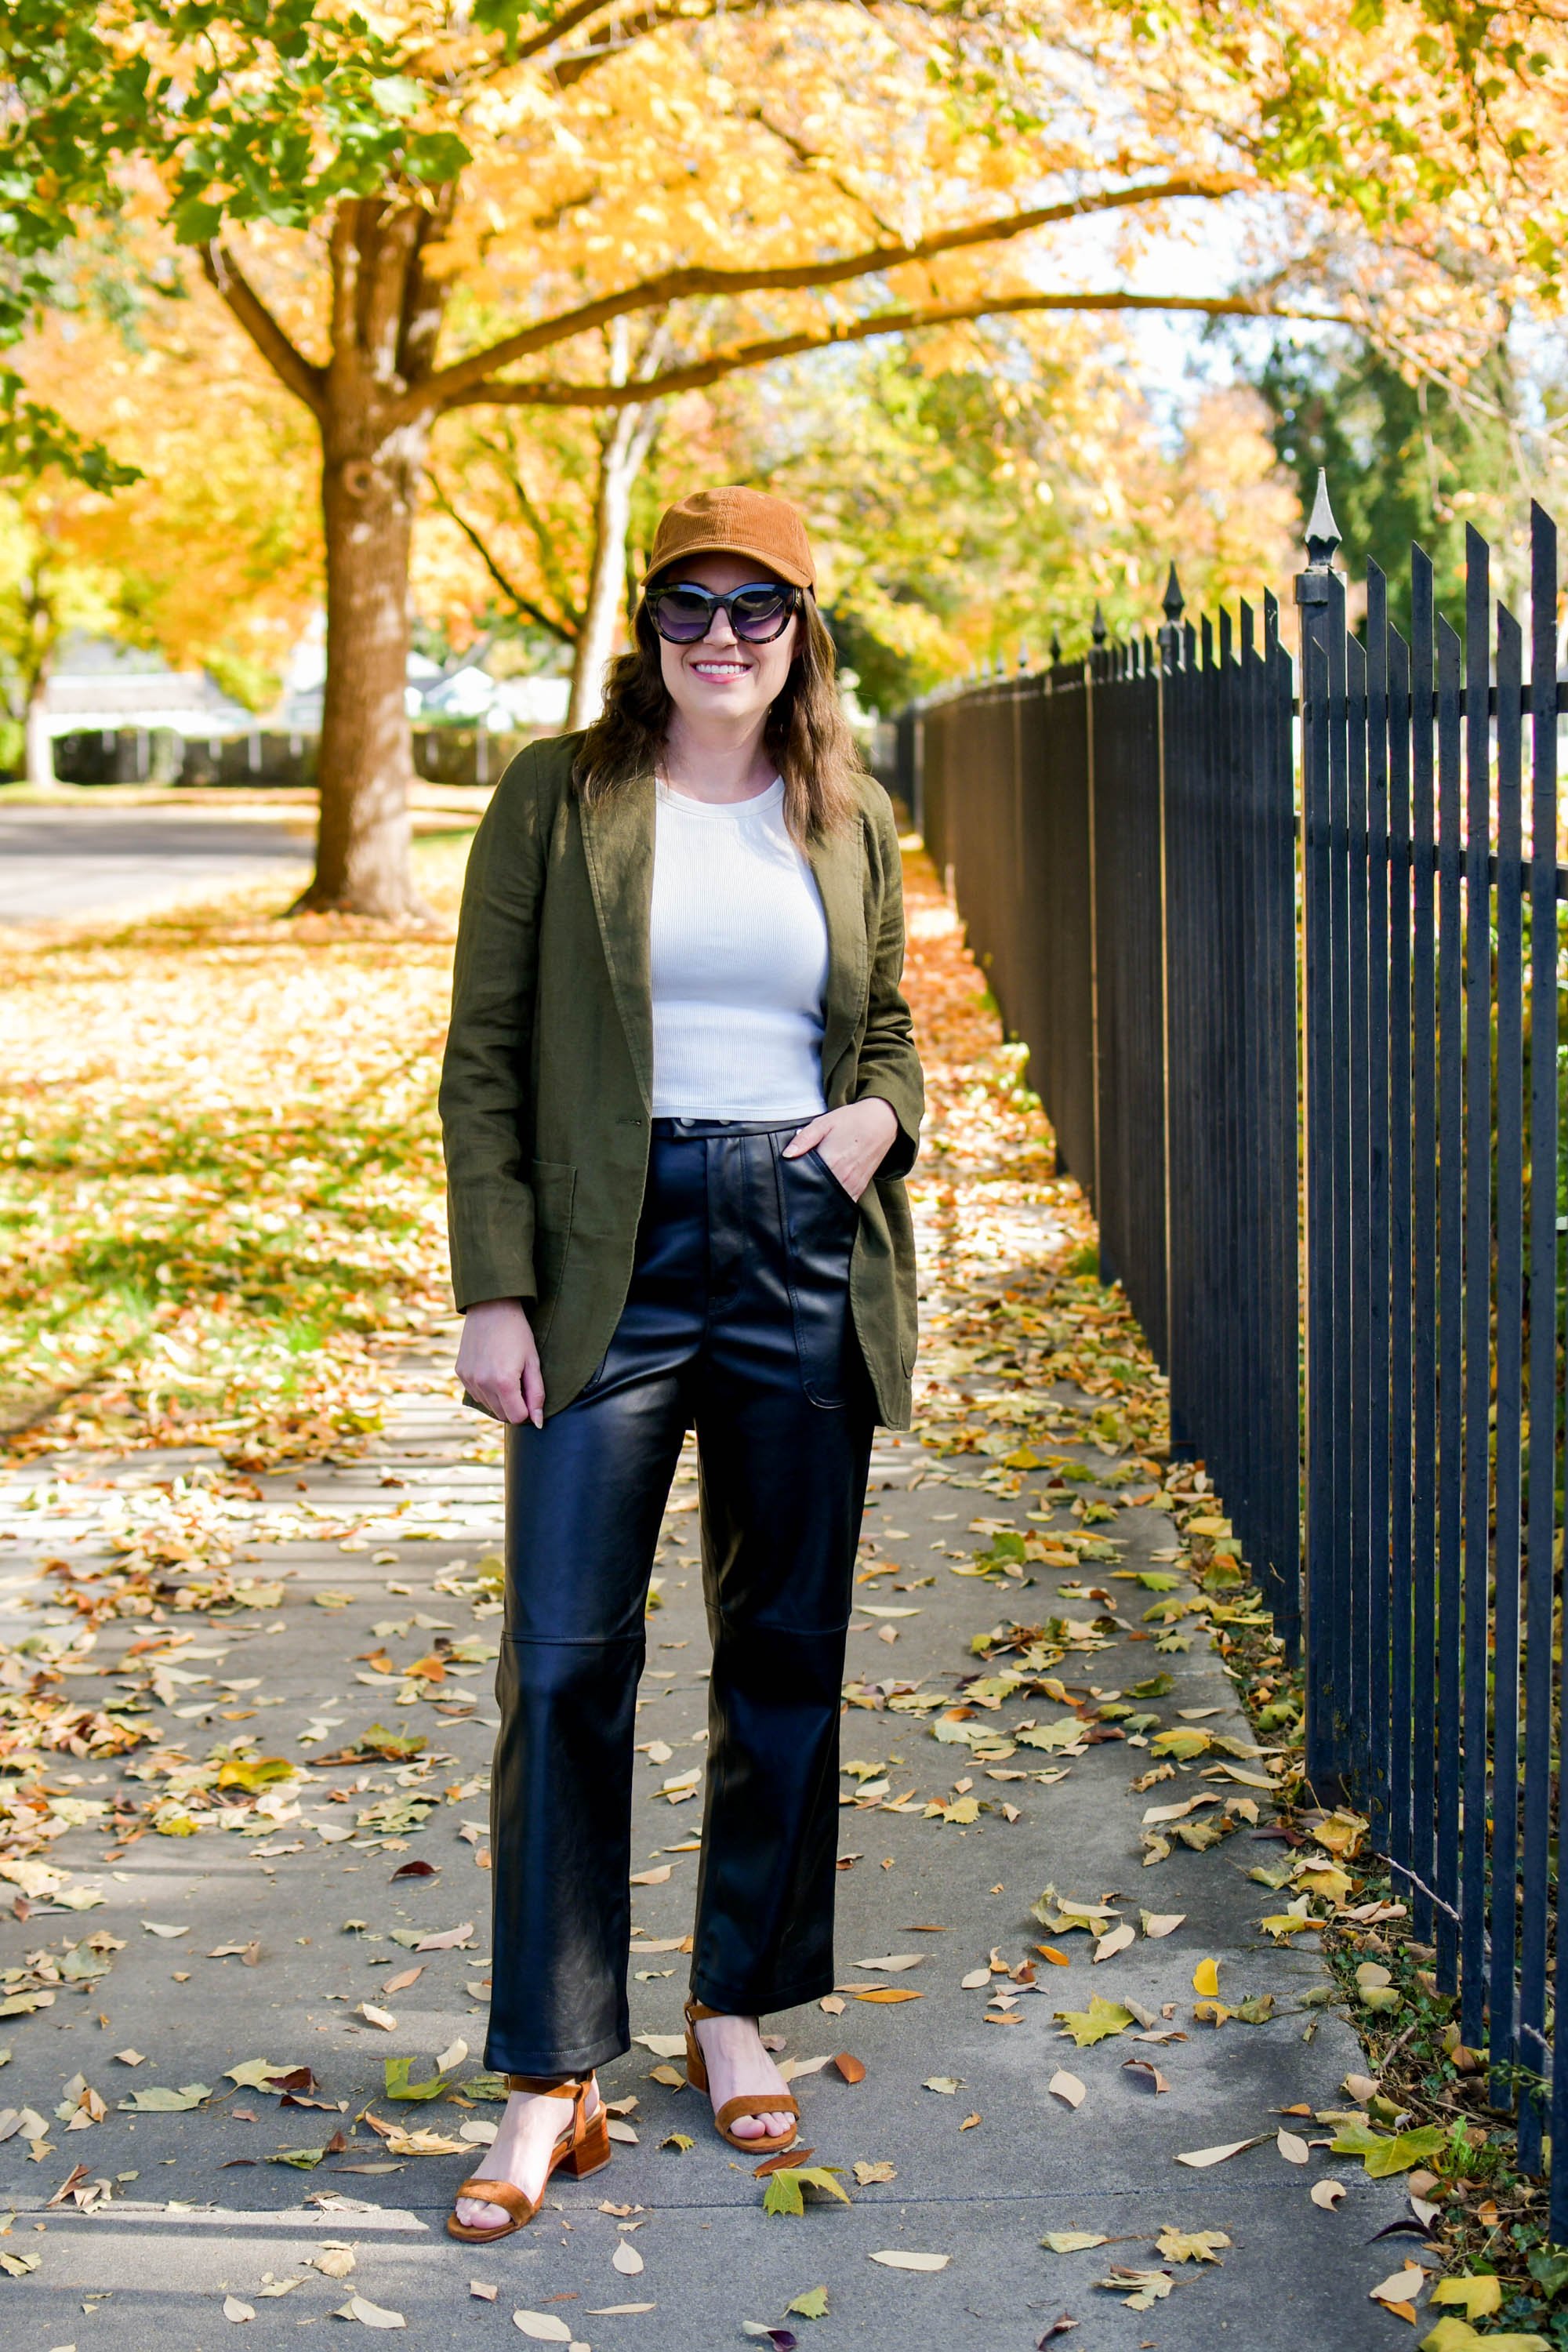 20 Pairs of Leather Pants That Will Make You Look Like an It Girl